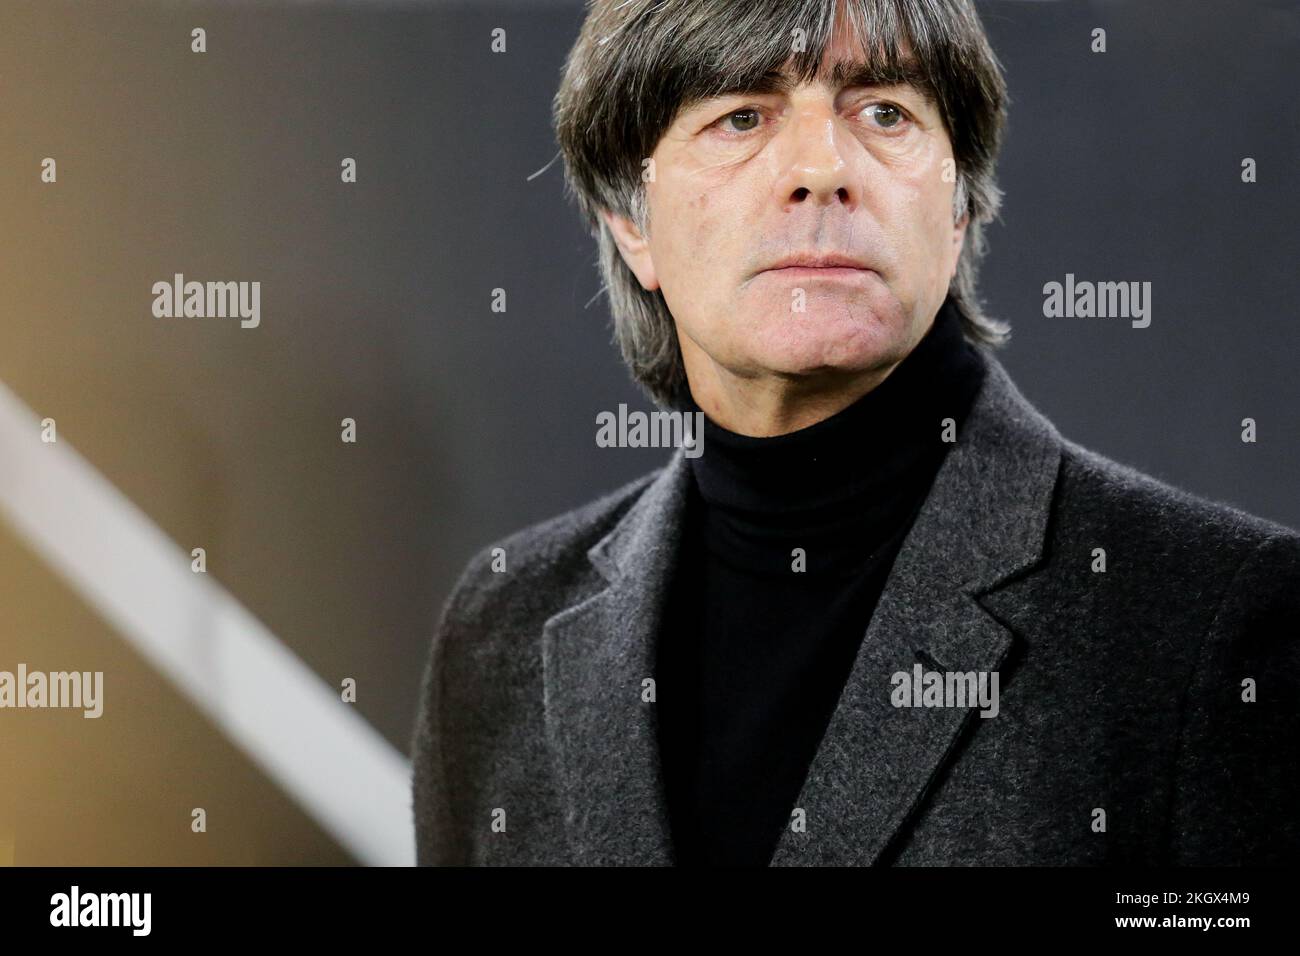 Wolfsburg, Germany, March 20, 2019: German national team head coach Joachim Low during the international soccer game Germany vs Serbia Stock Photo